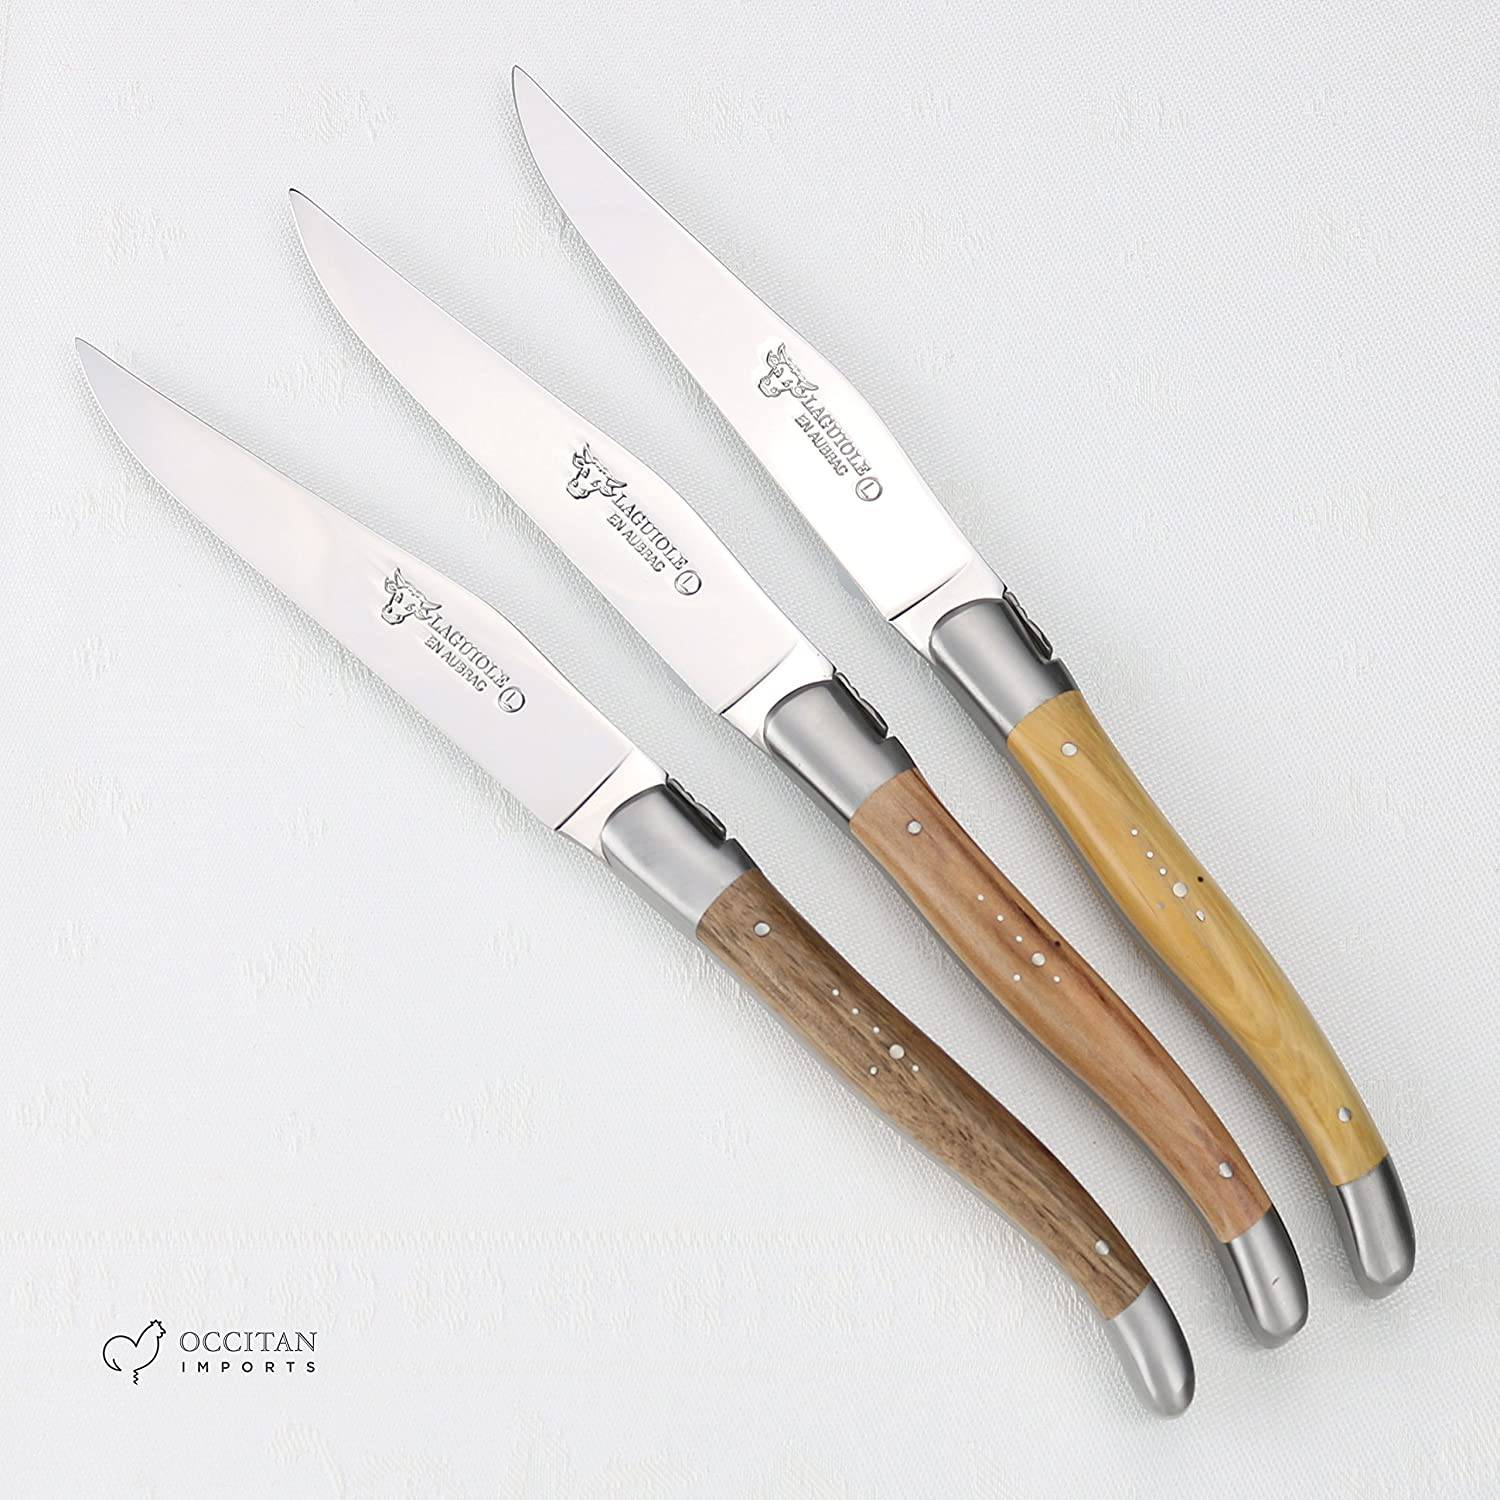 Laguiole Steak Knives, Set of 6 Knives, Stainless Steel, ABS Handle,  Handmade, 4 Colours Available, Dishwasher Safe, French Laguiole Knives 